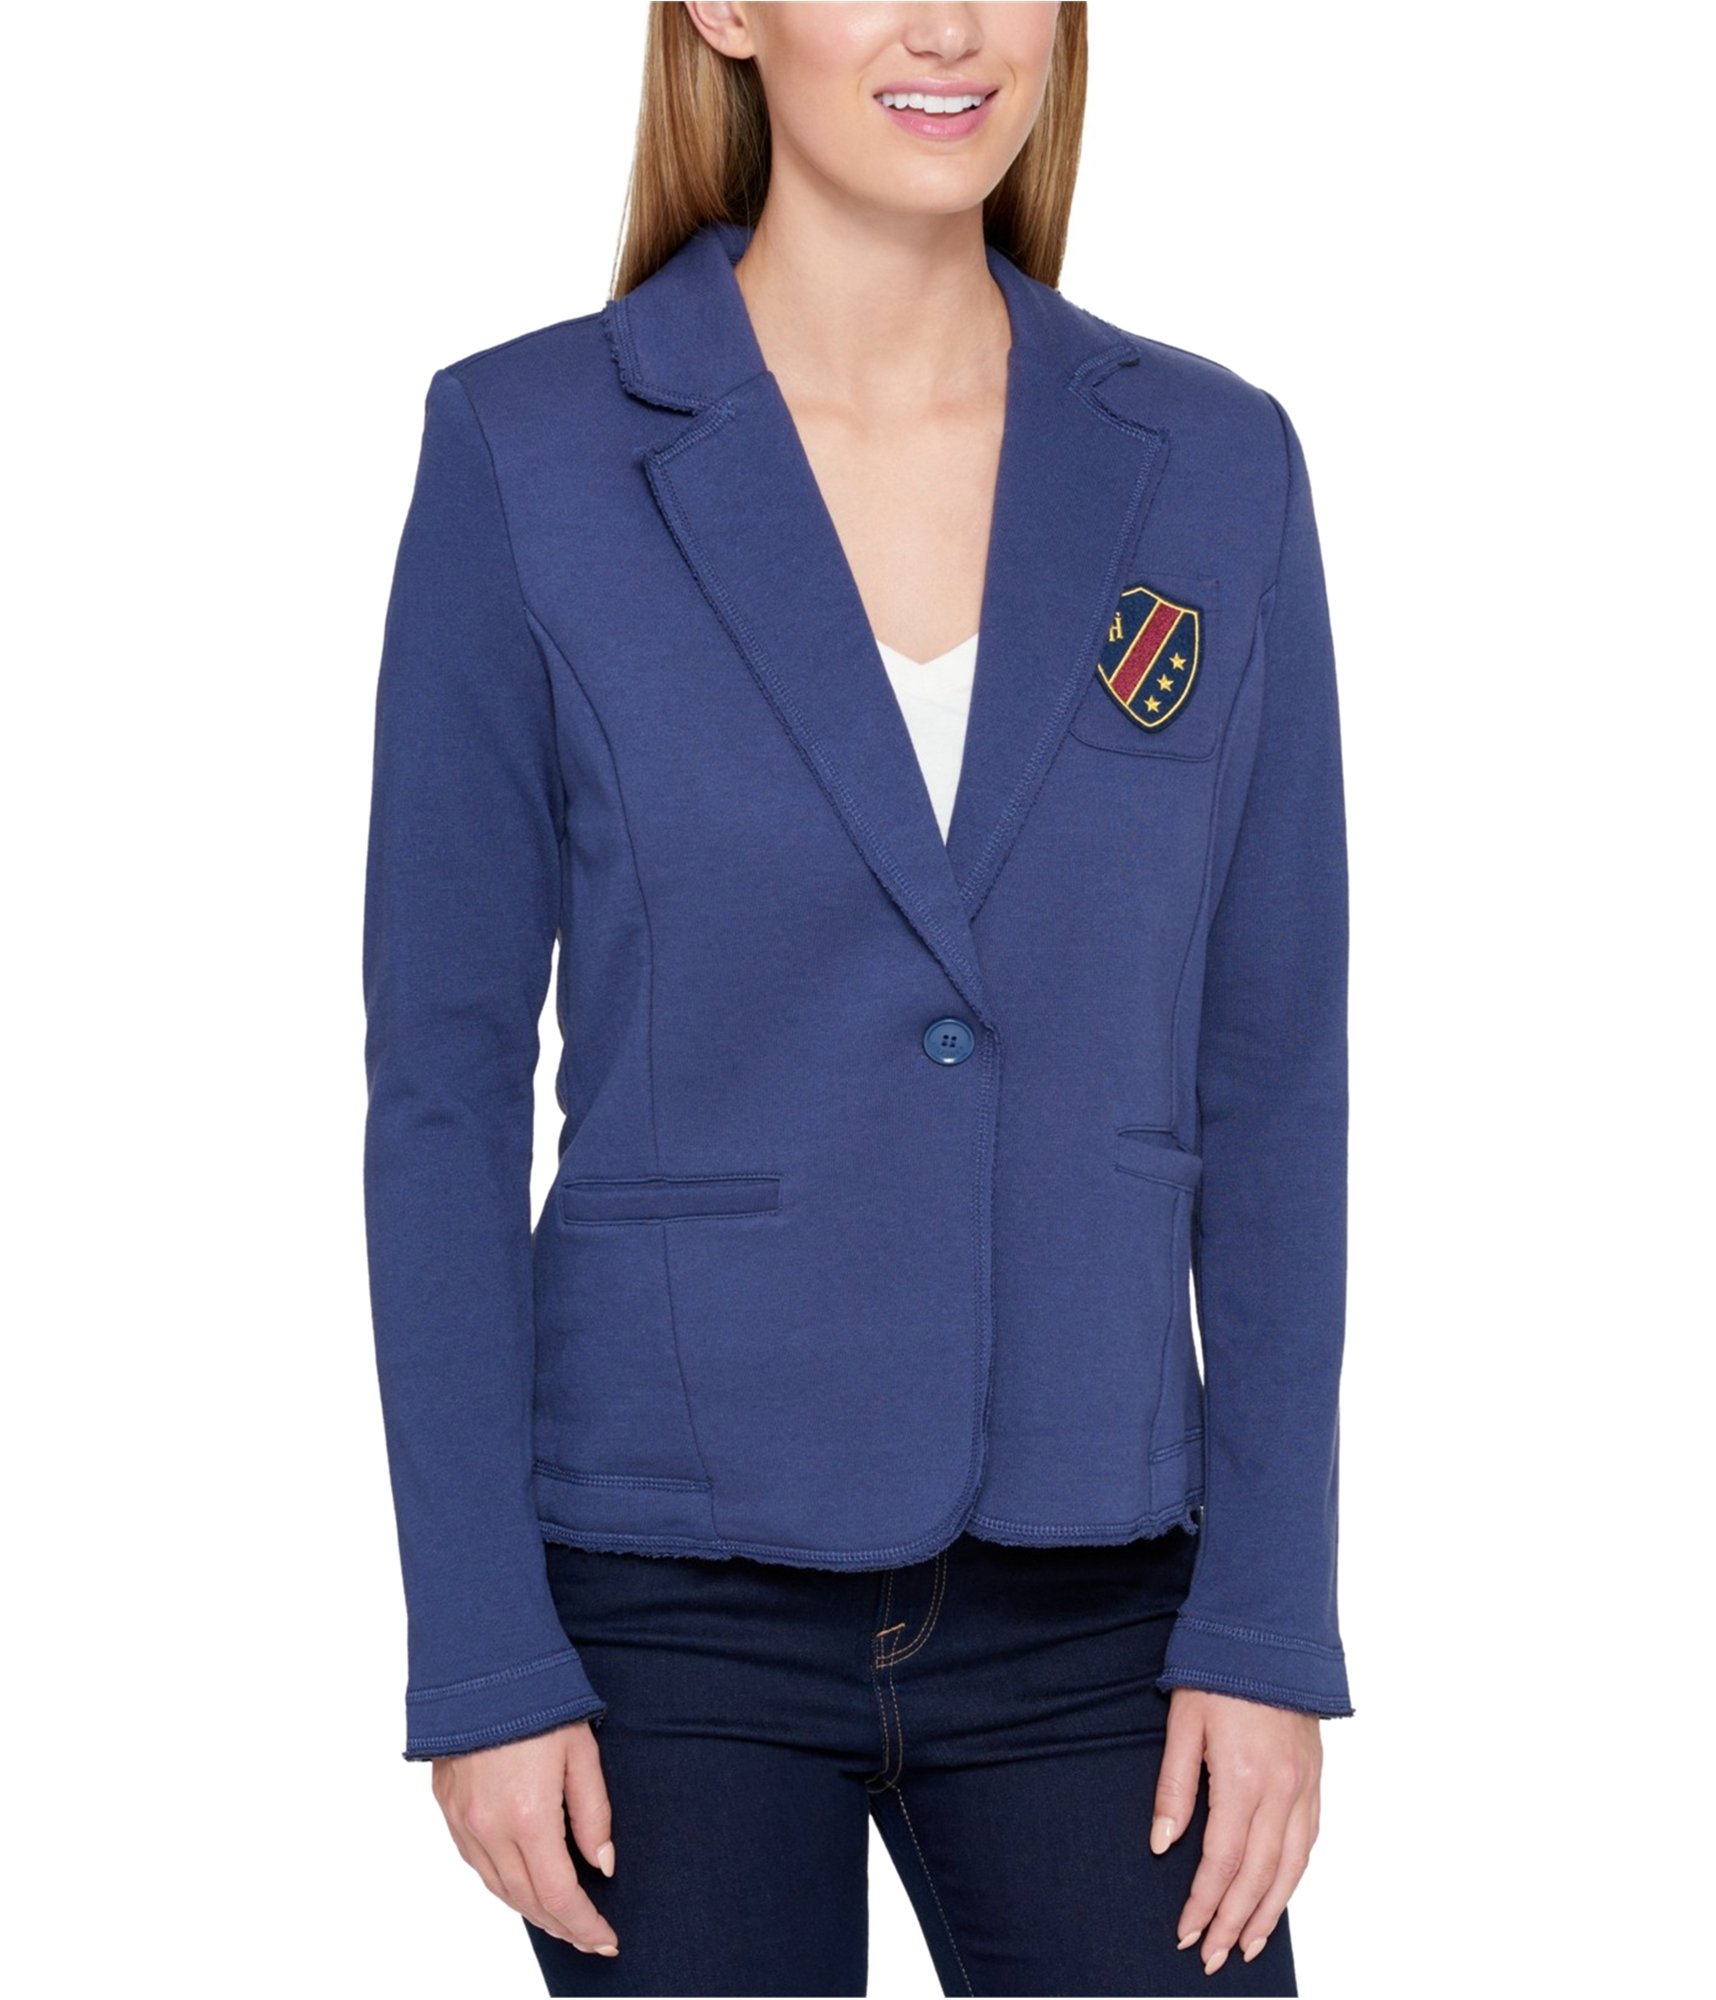 Buy a Tommy Patched One Button Blazer Online | TagsWeekly.com